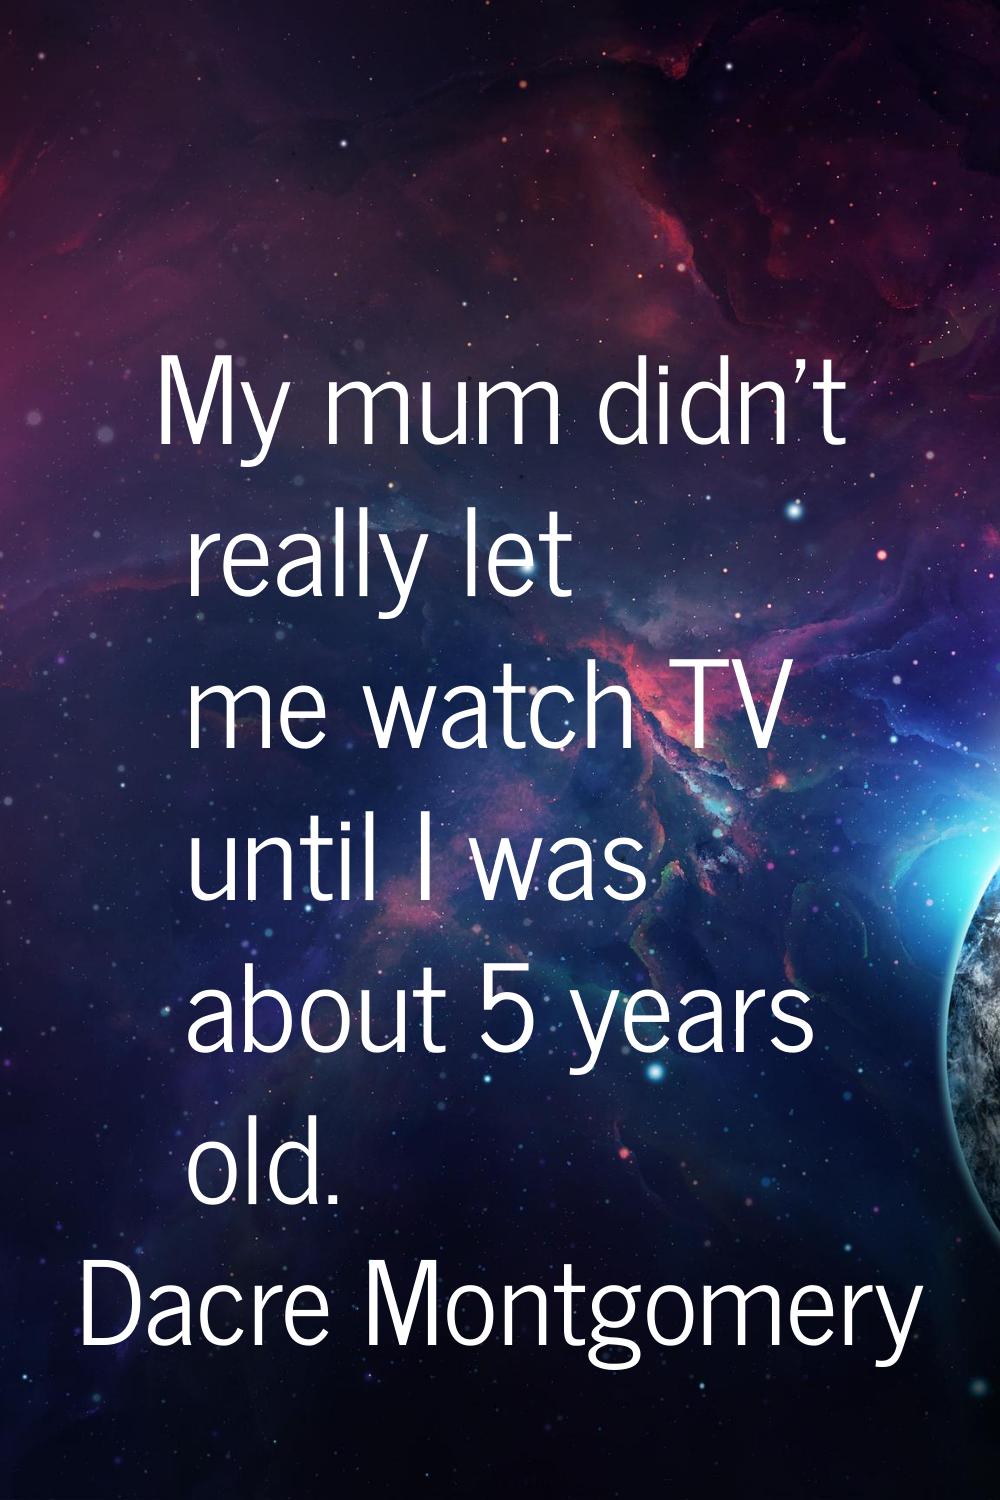 My mum didn't really let me watch TV until I was about 5 years old.